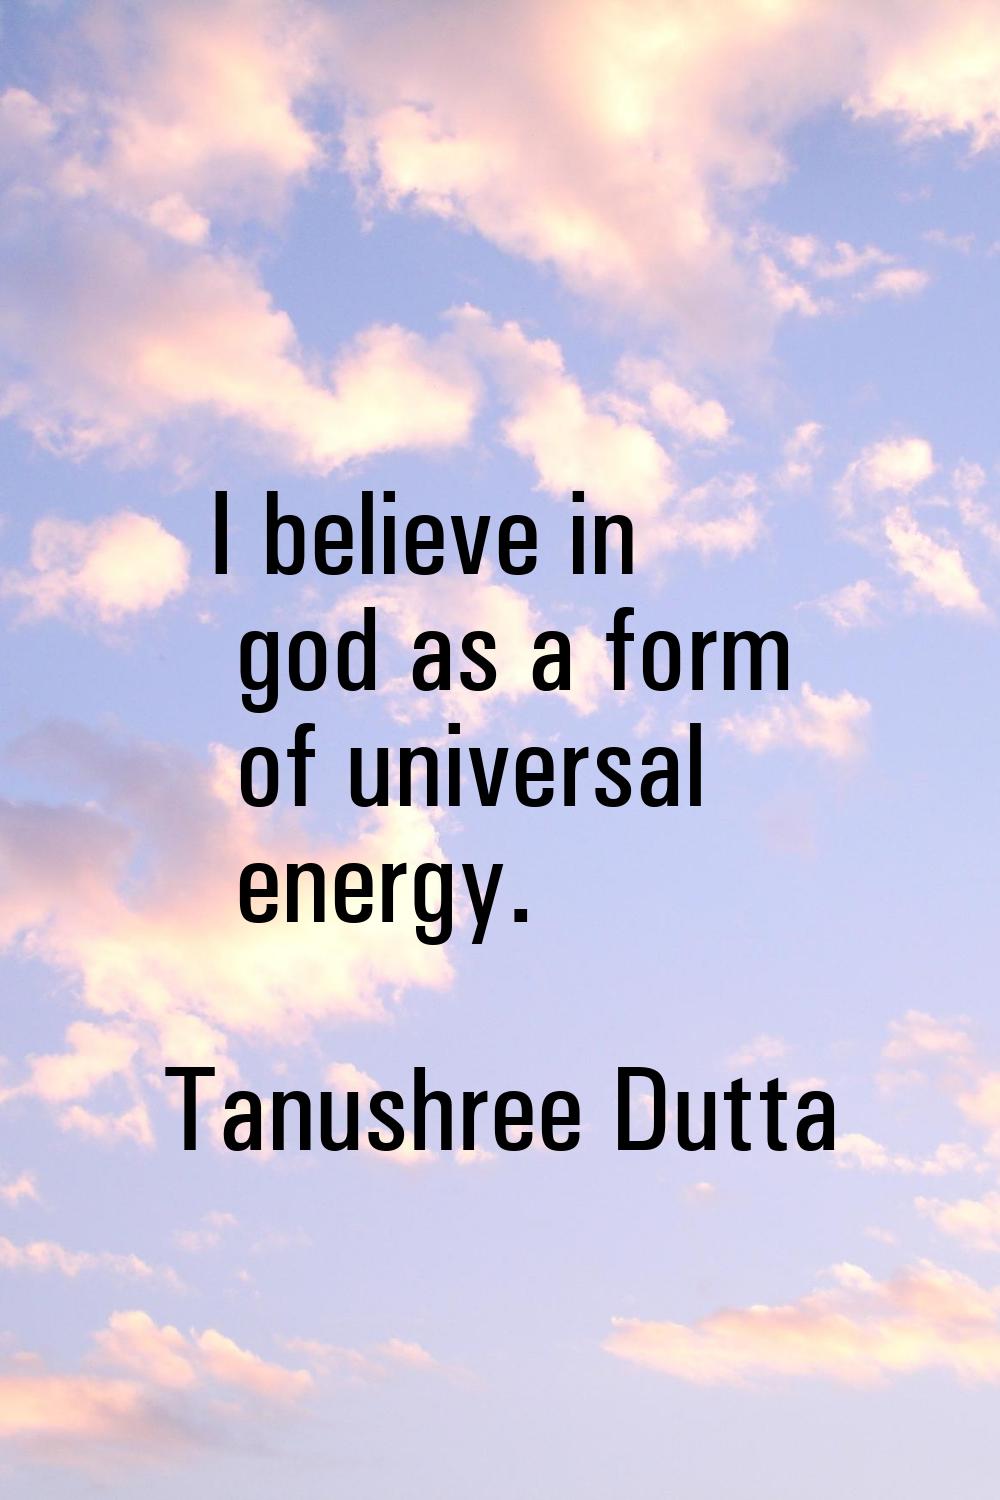 I believe in god as a form of universal energy.